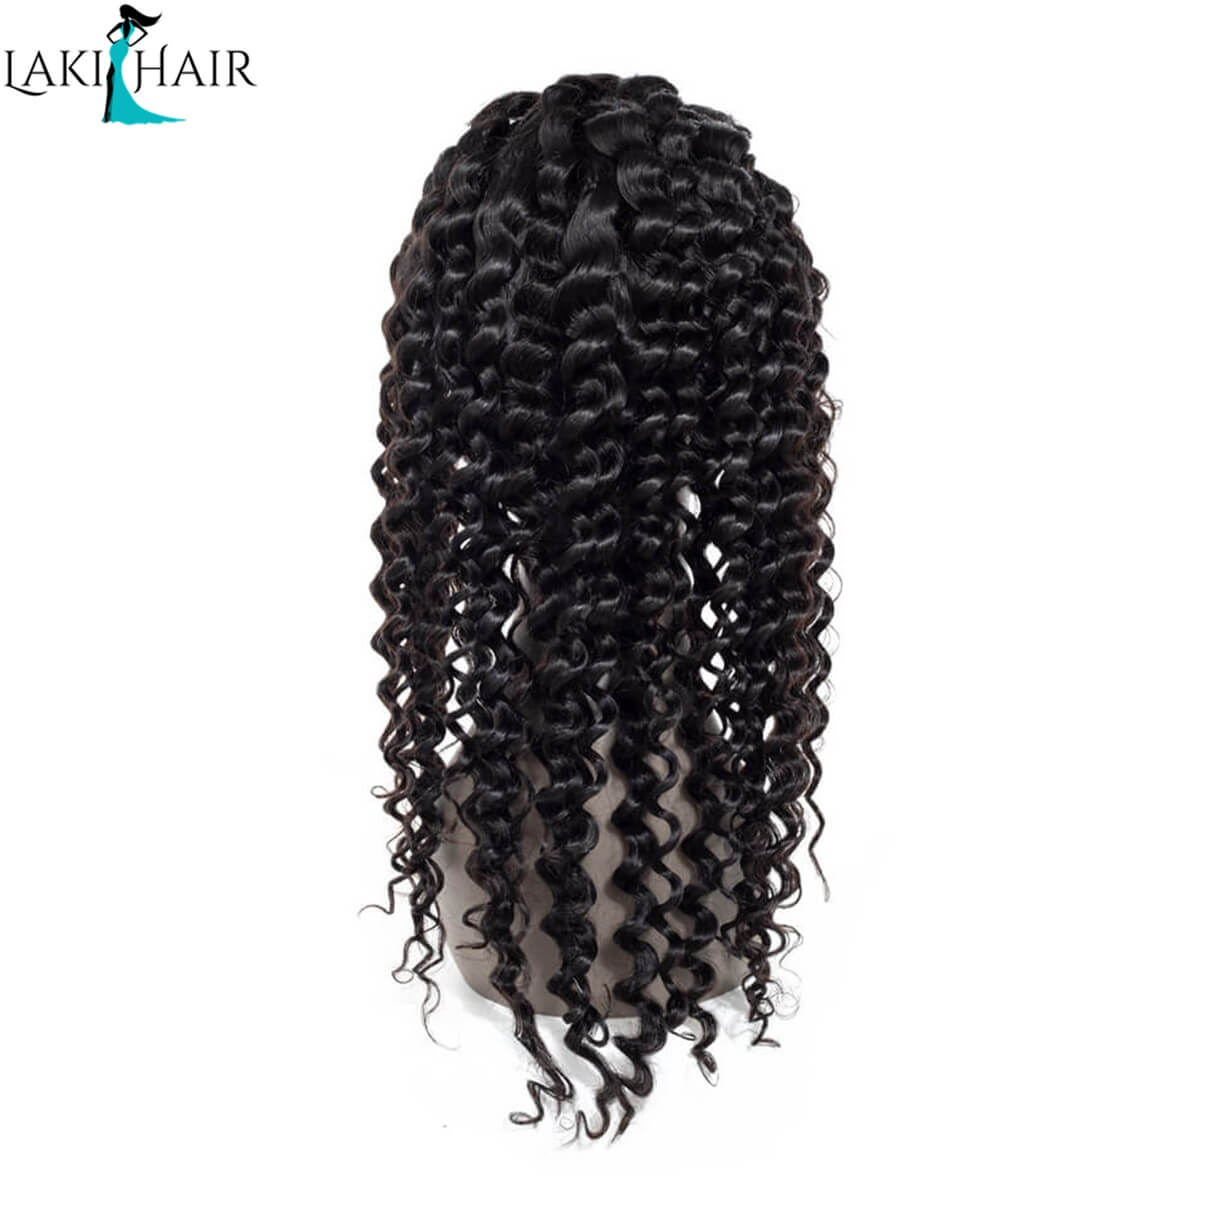 Lakihair Lace Front Wigs Deep Wave 180% Full Density 100% Virgin Human Hair Wigs With Baby Hair